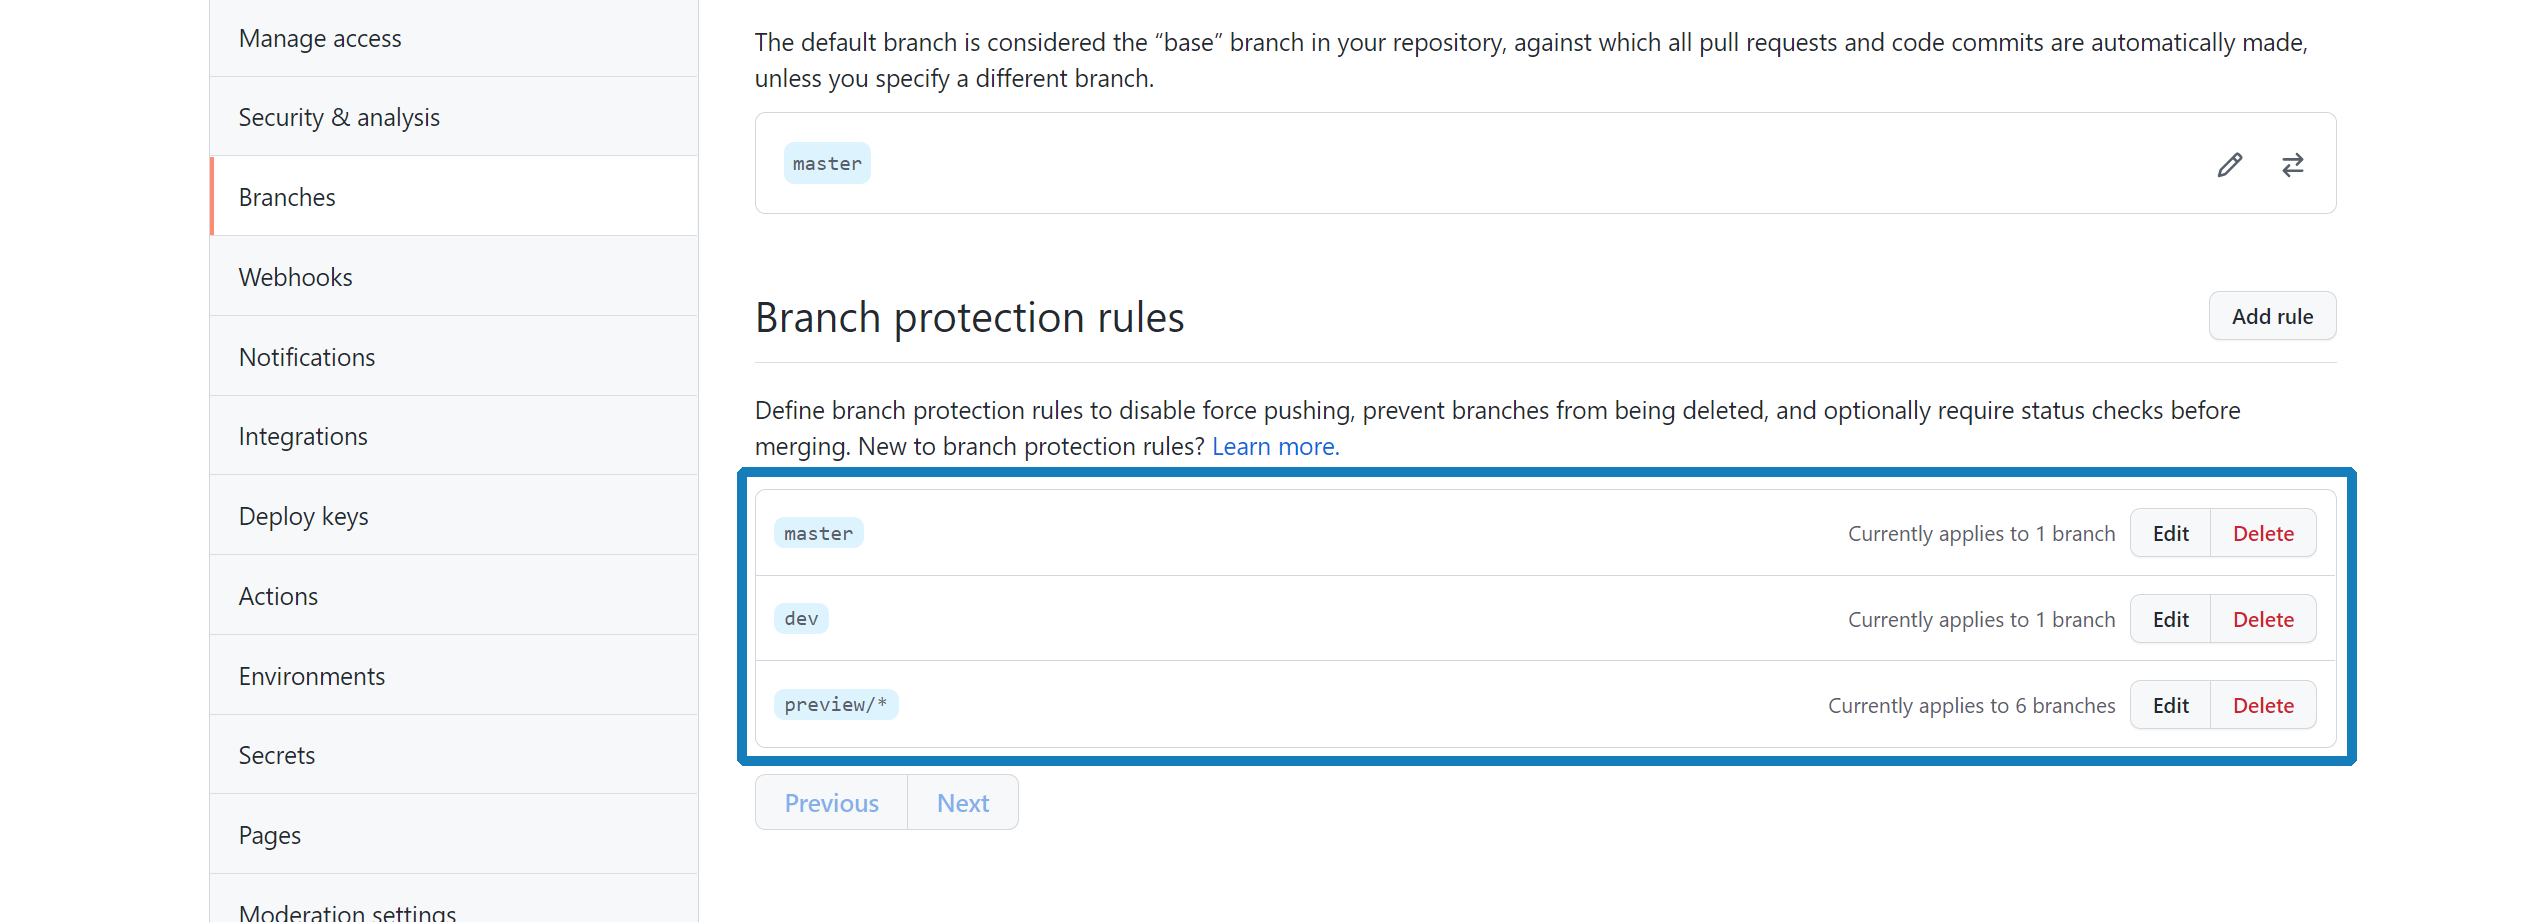 Box highlighting the branch protection rules (One for master, one for dev, and one for preview/*) on the Branch Protection Rules pages